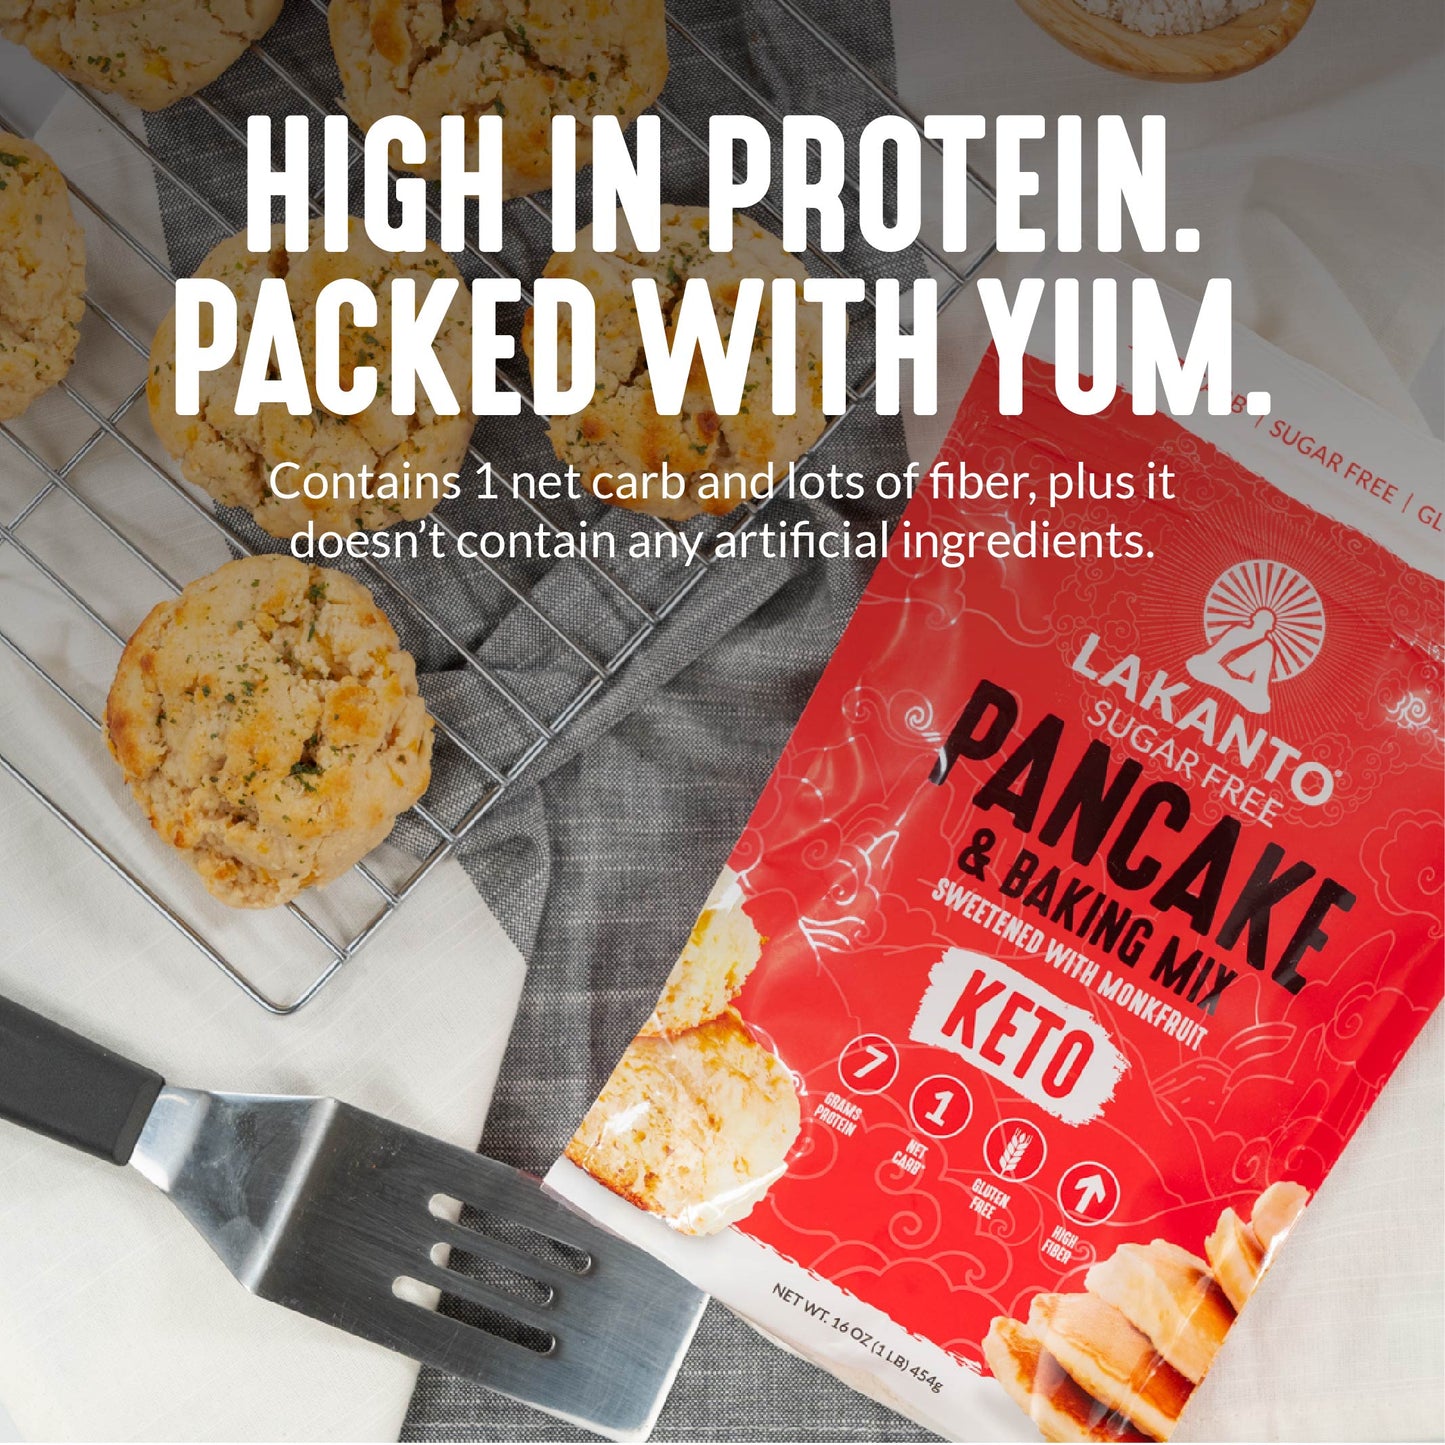 Delicious and High in Protein Pancake and Baking Mix by Lakanto 